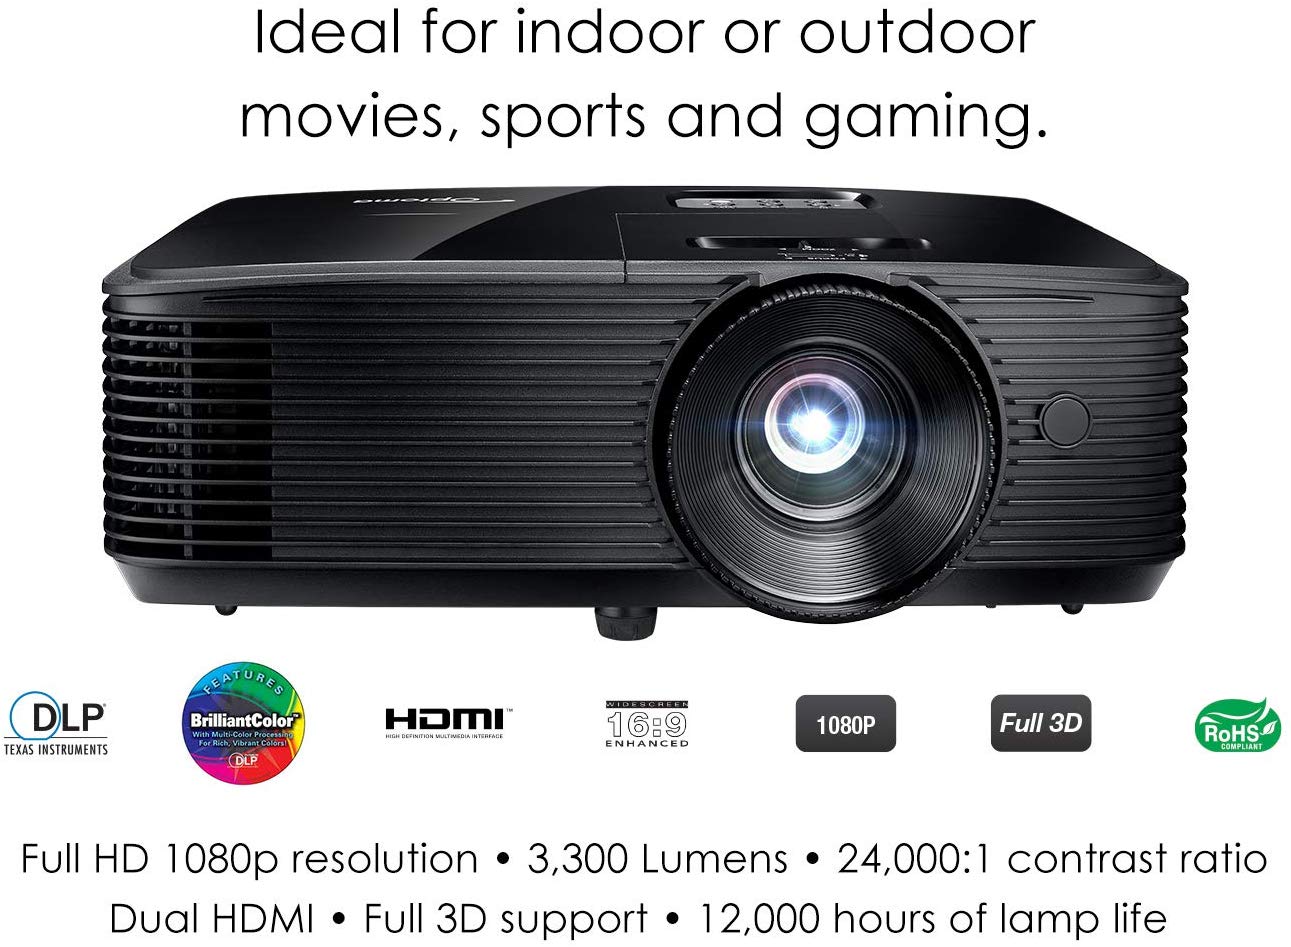 Optoma HD243X 1080p Projector for Movies and Gaming, Super Bright 3300 Lumens, Long 12000h Lamp Life, 3D Support, Easy Setup with Zoom and Keystone Adjustment